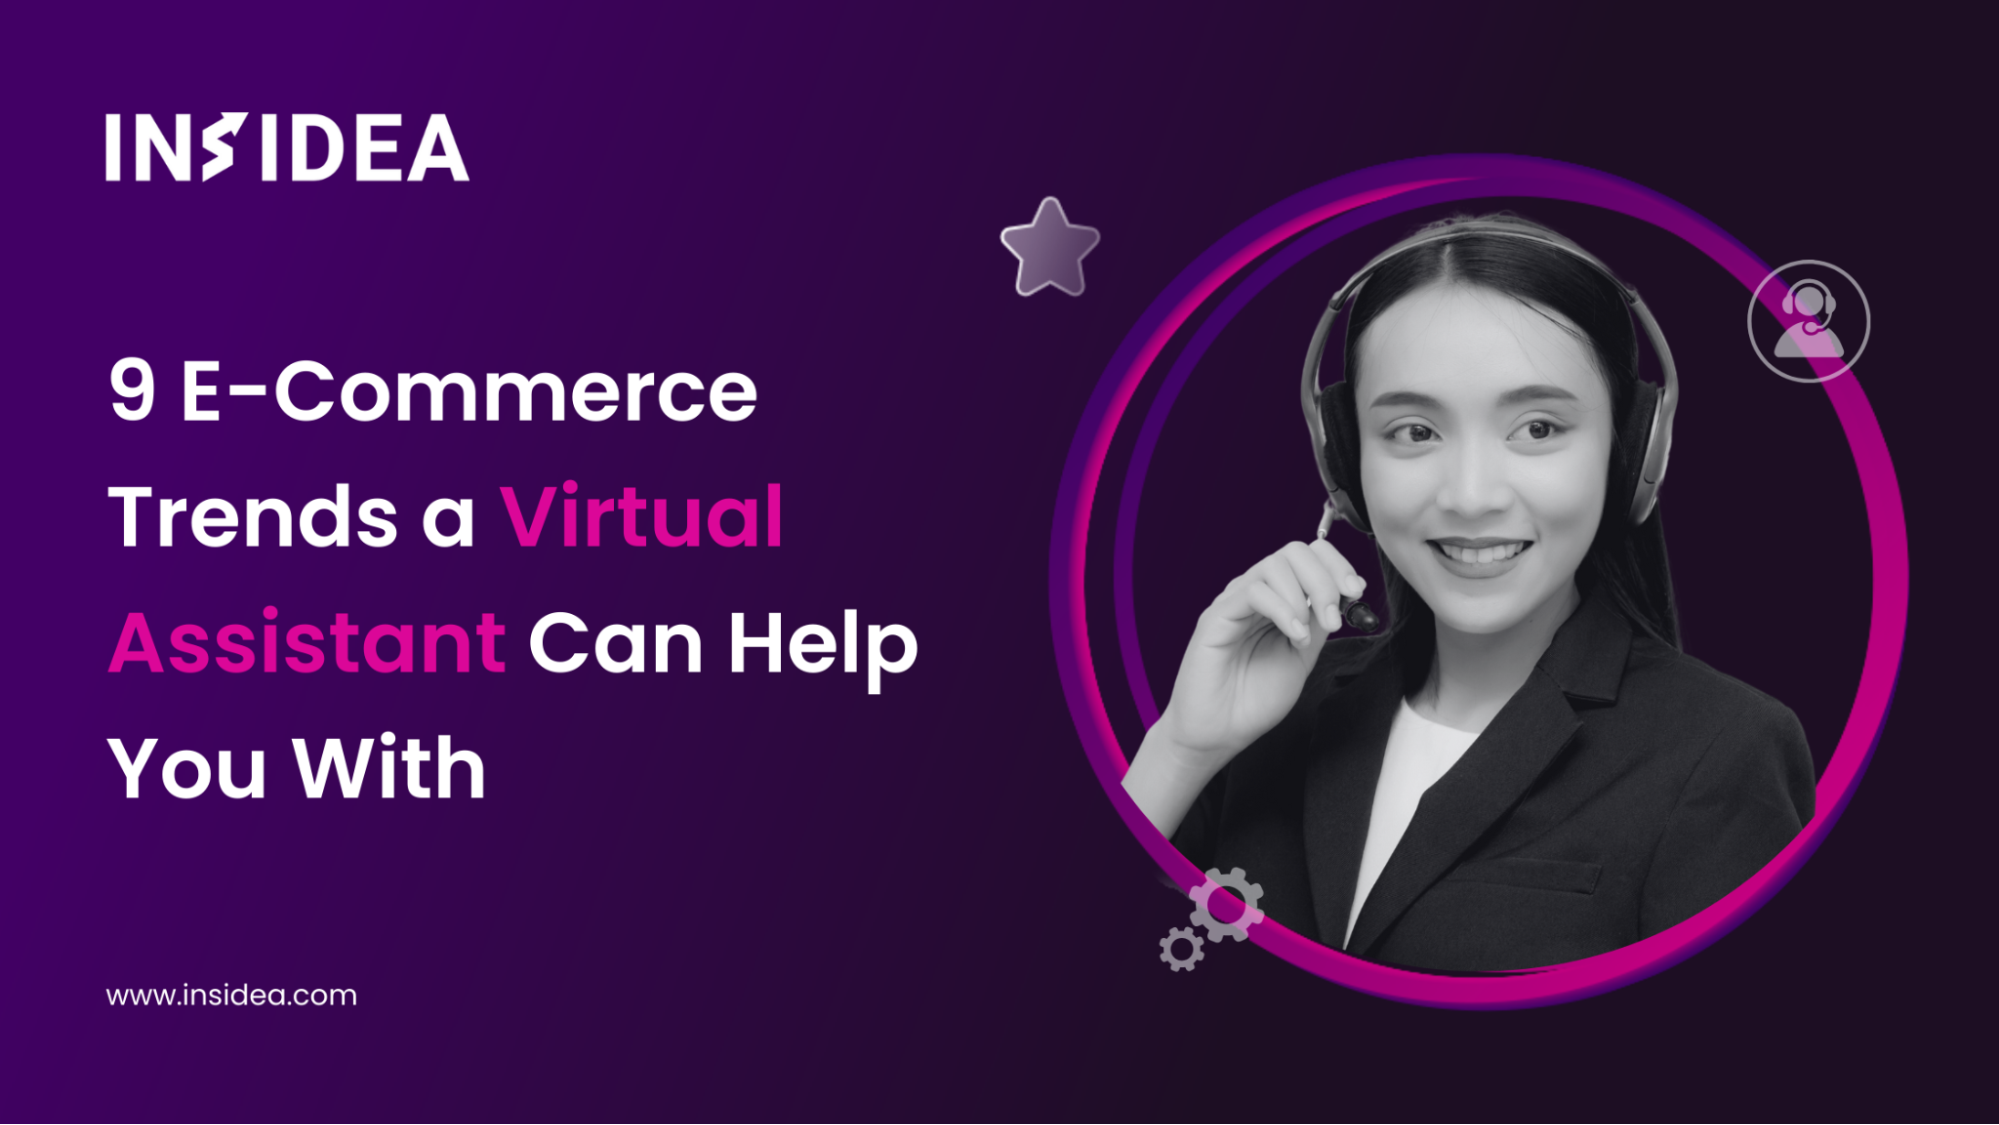 9 E-Commerce Trends a Virtual Assistant Can Help You With